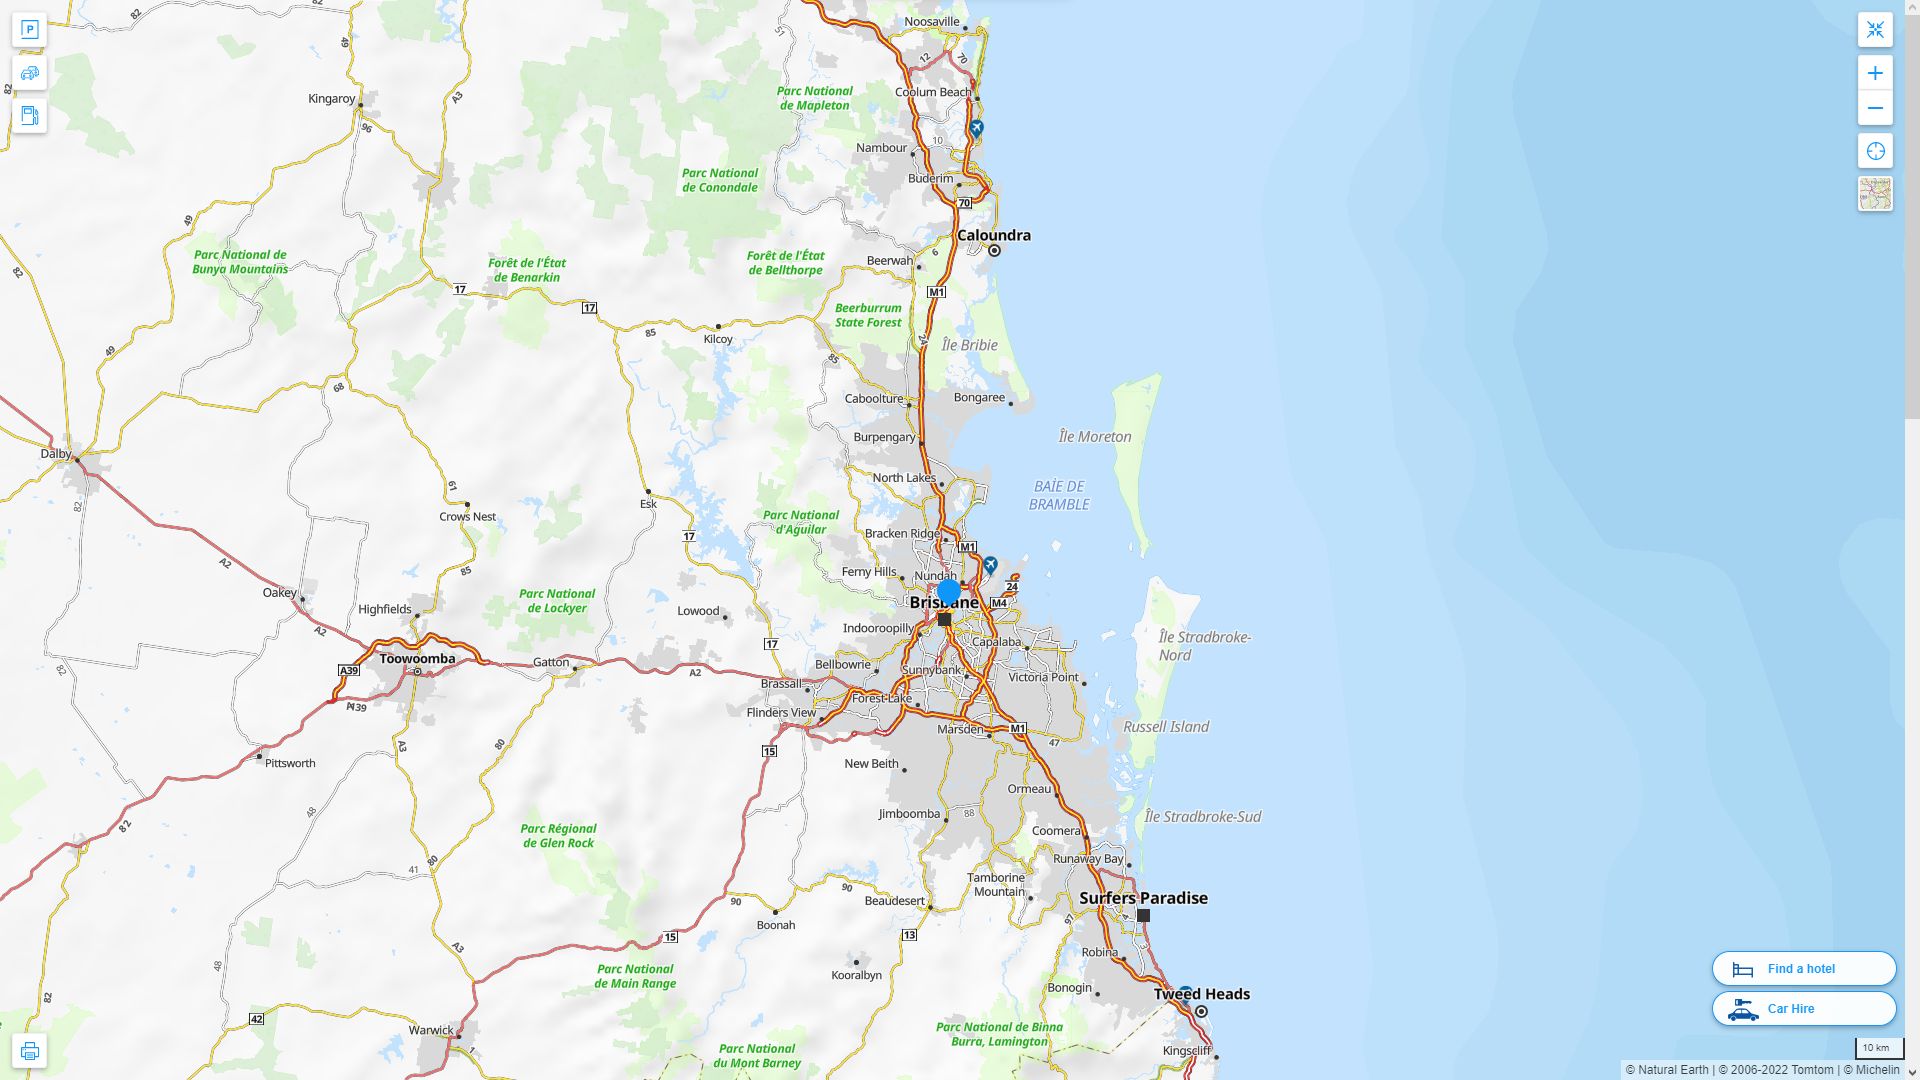 Brisbane Highway and Road Map